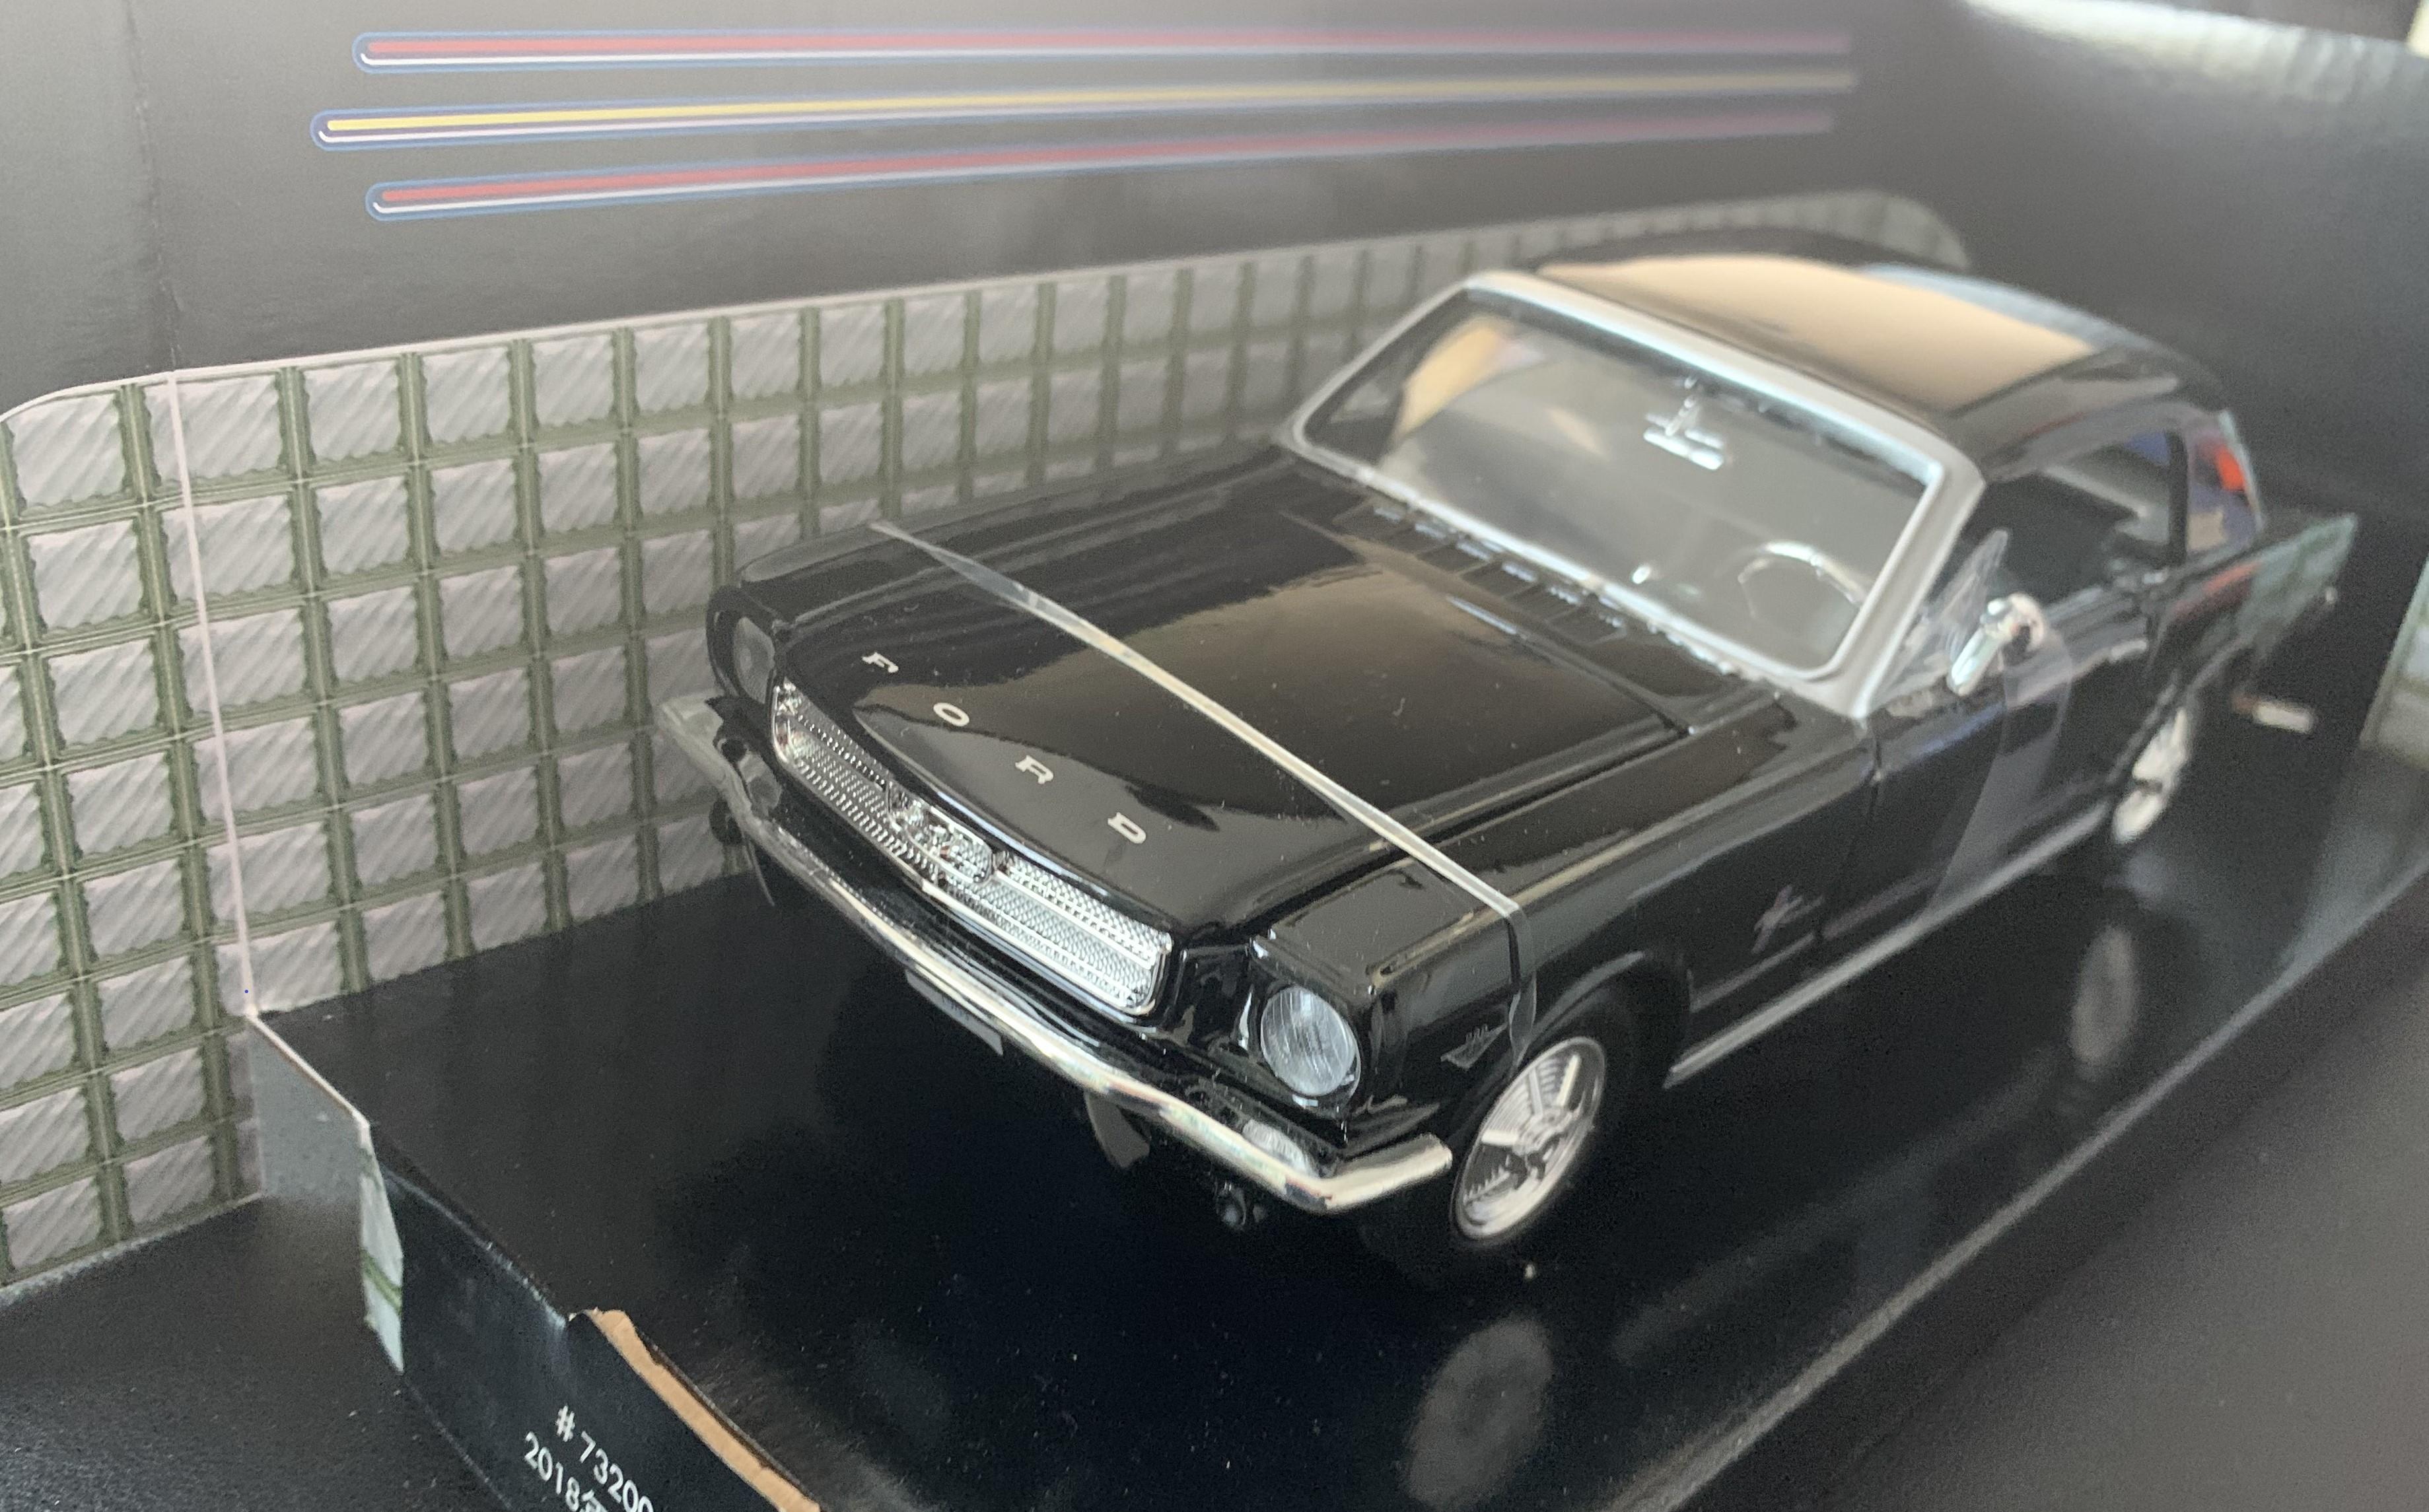 Ford Mustang Hard Top 1964 1/2 in black 1:24 scale model from Motormax